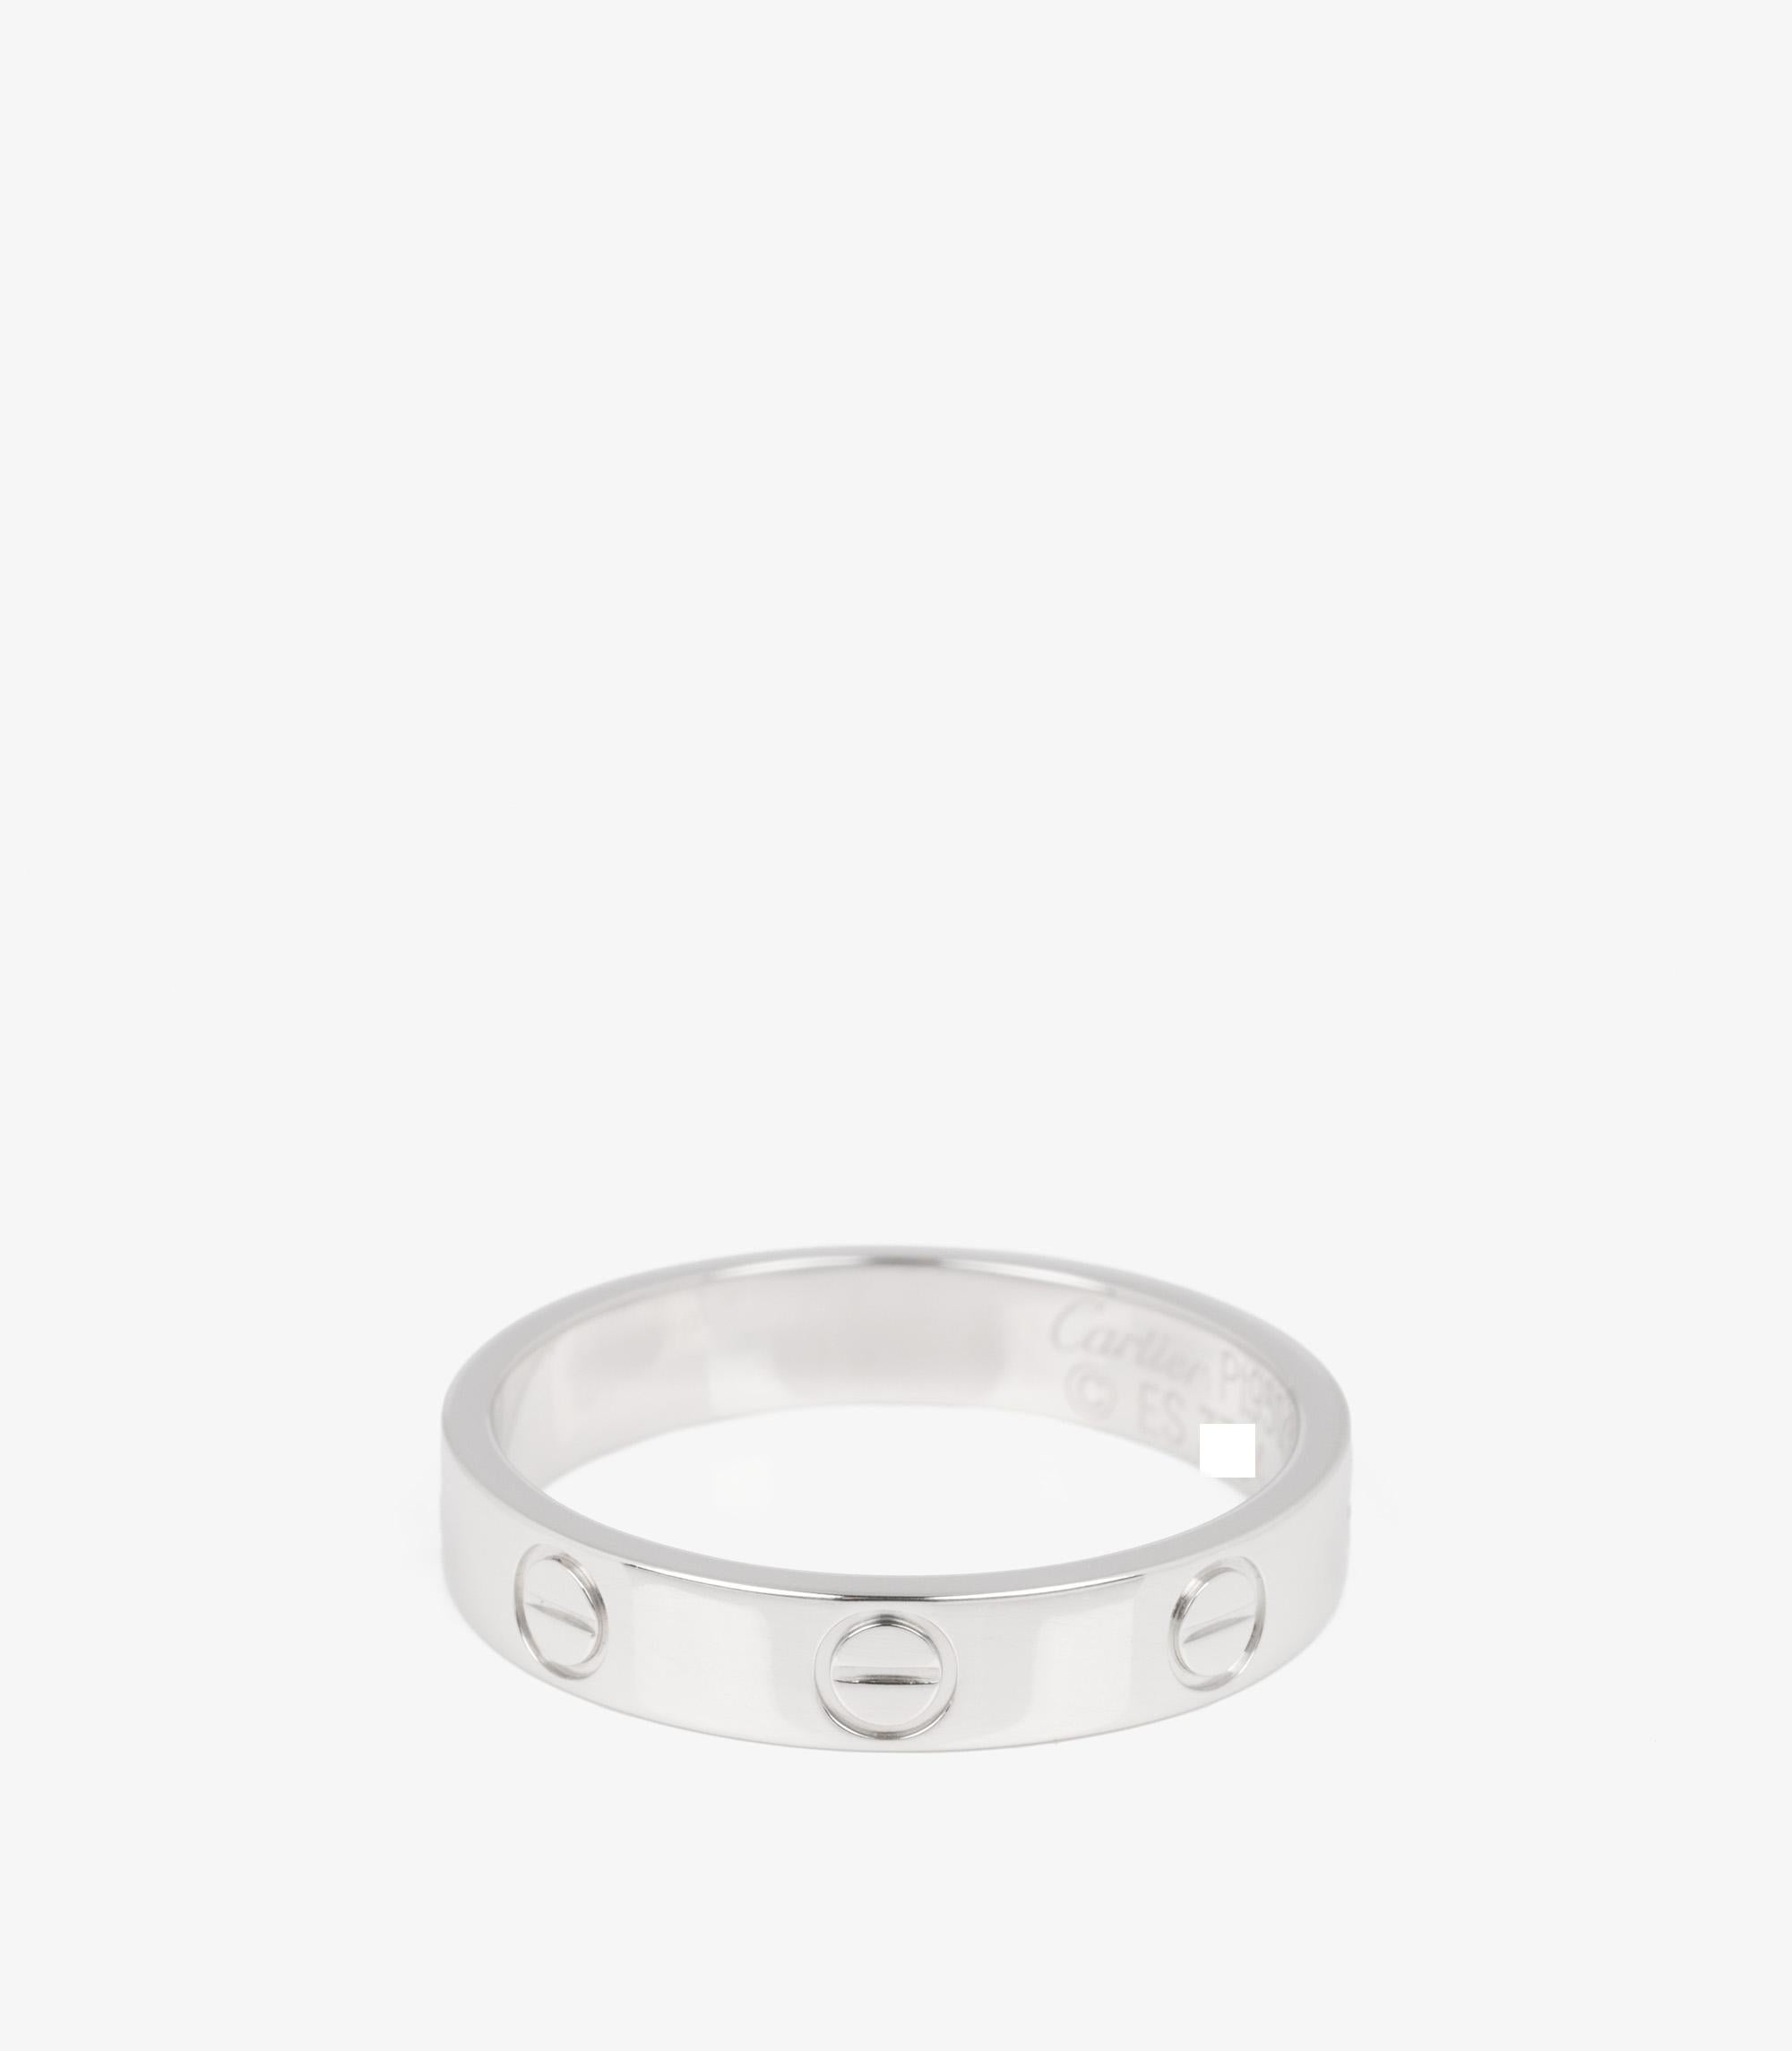 Cartier Platinum Love Wedding Band Ring

Brand- Cartier
Model- Love Wedding Band
Product Type- Ring
Serial Number- ES****
Age- Circa 2006
Accompanied By- Cartier Certificate
Material(s)- Platinum
UK Ring Size- M 1/2
EU Ring Size- 53
US Ring Size- 6